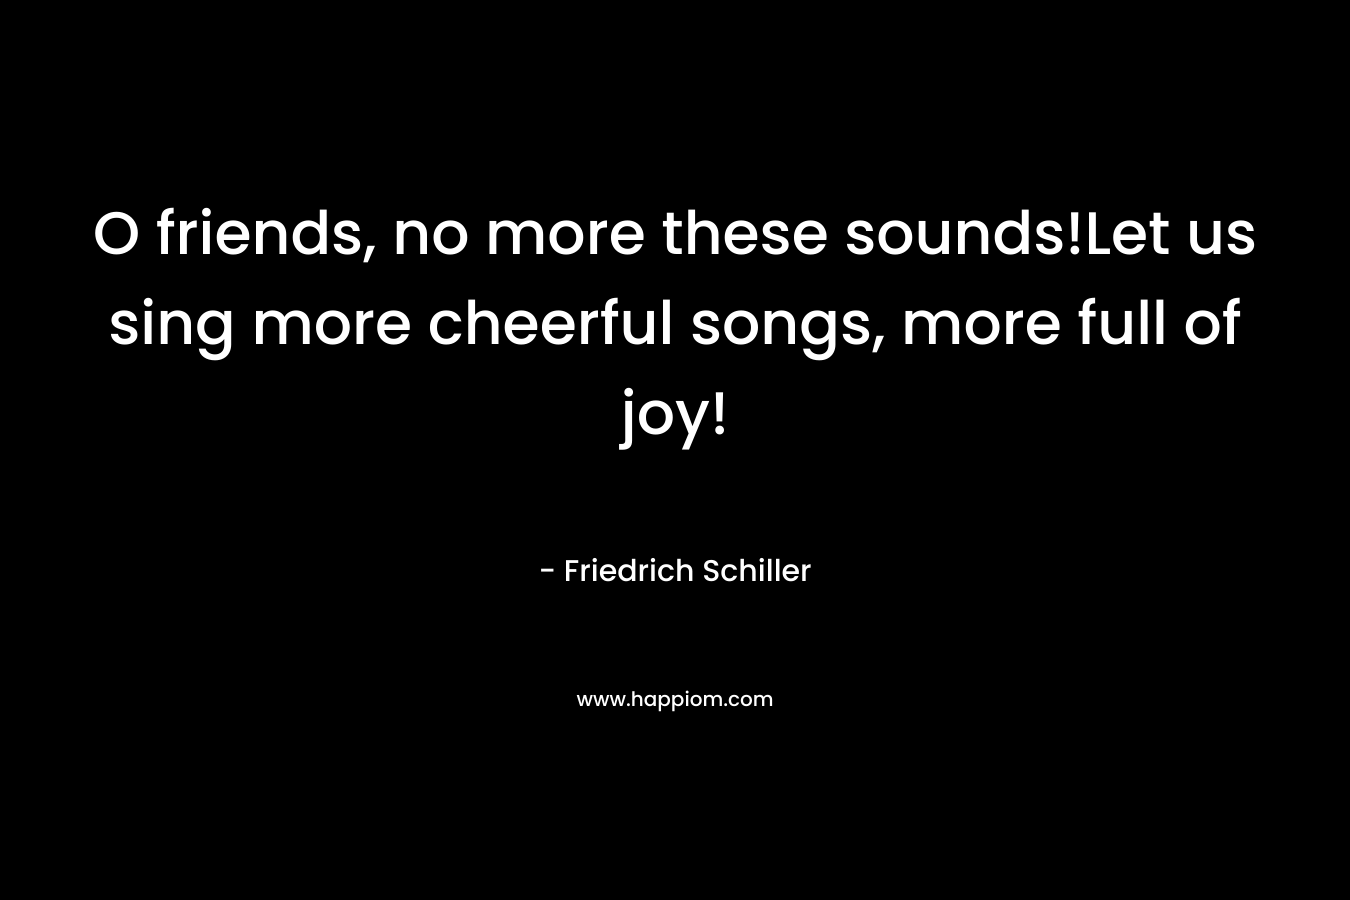 O friends, no more these sounds!Let us sing more cheerful songs, more full of joy!